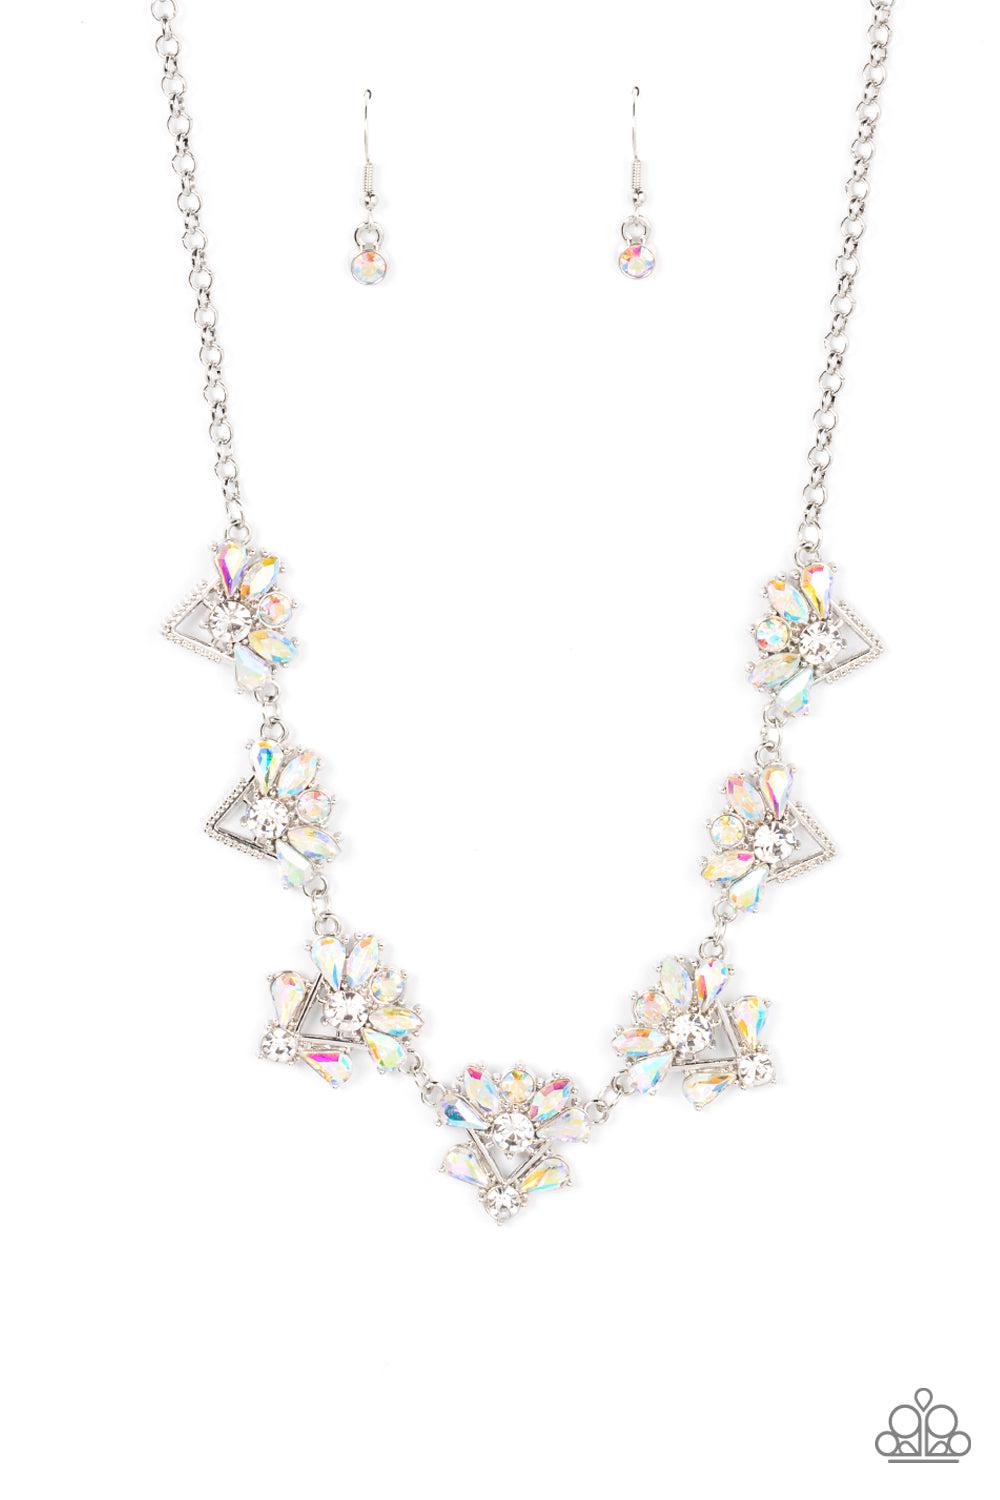 Extragalactic Extravagance Multi Iridescent Necklace - Paparazzi Accessories- lightbox - CarasShop.com - $5 Jewelry by Cara Jewels